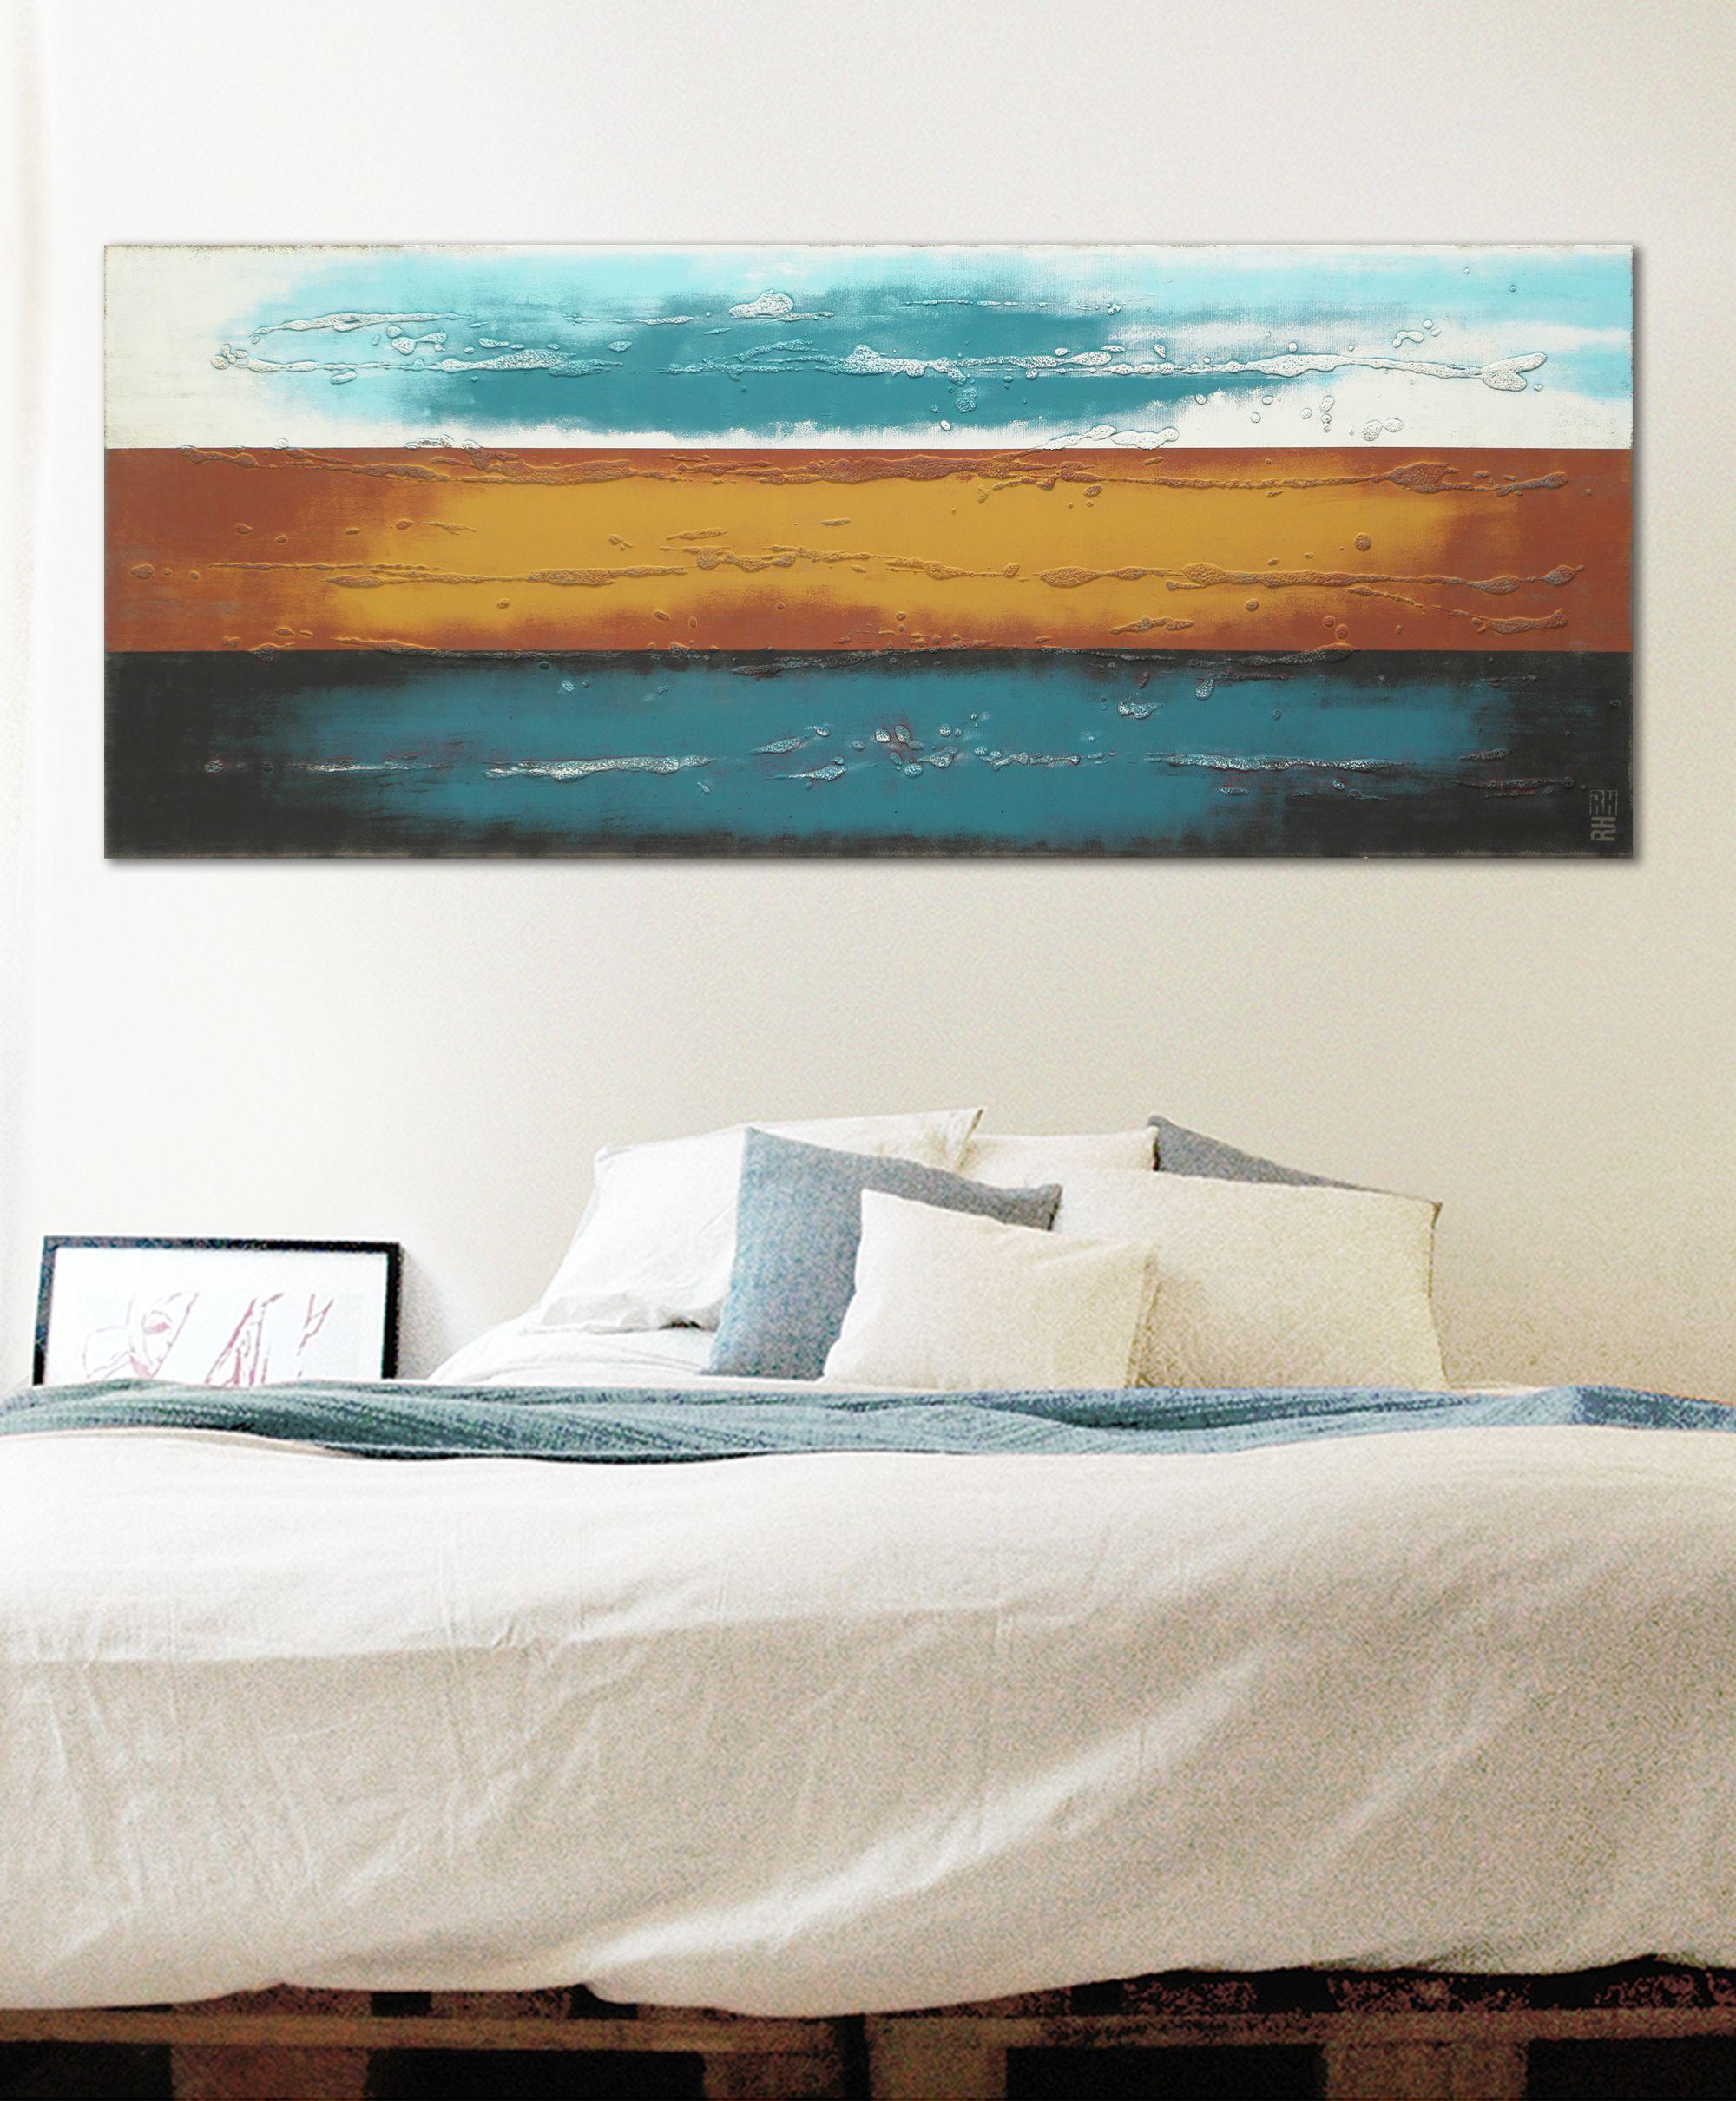 Acrylic Abstract Painting, Original artwork created by Ronald Hunter.    An abstract composition of blue shades, brown and blue, reminiscent of an open horizon. This abstract painting is made with many layers of acrylic paint, creating depth and